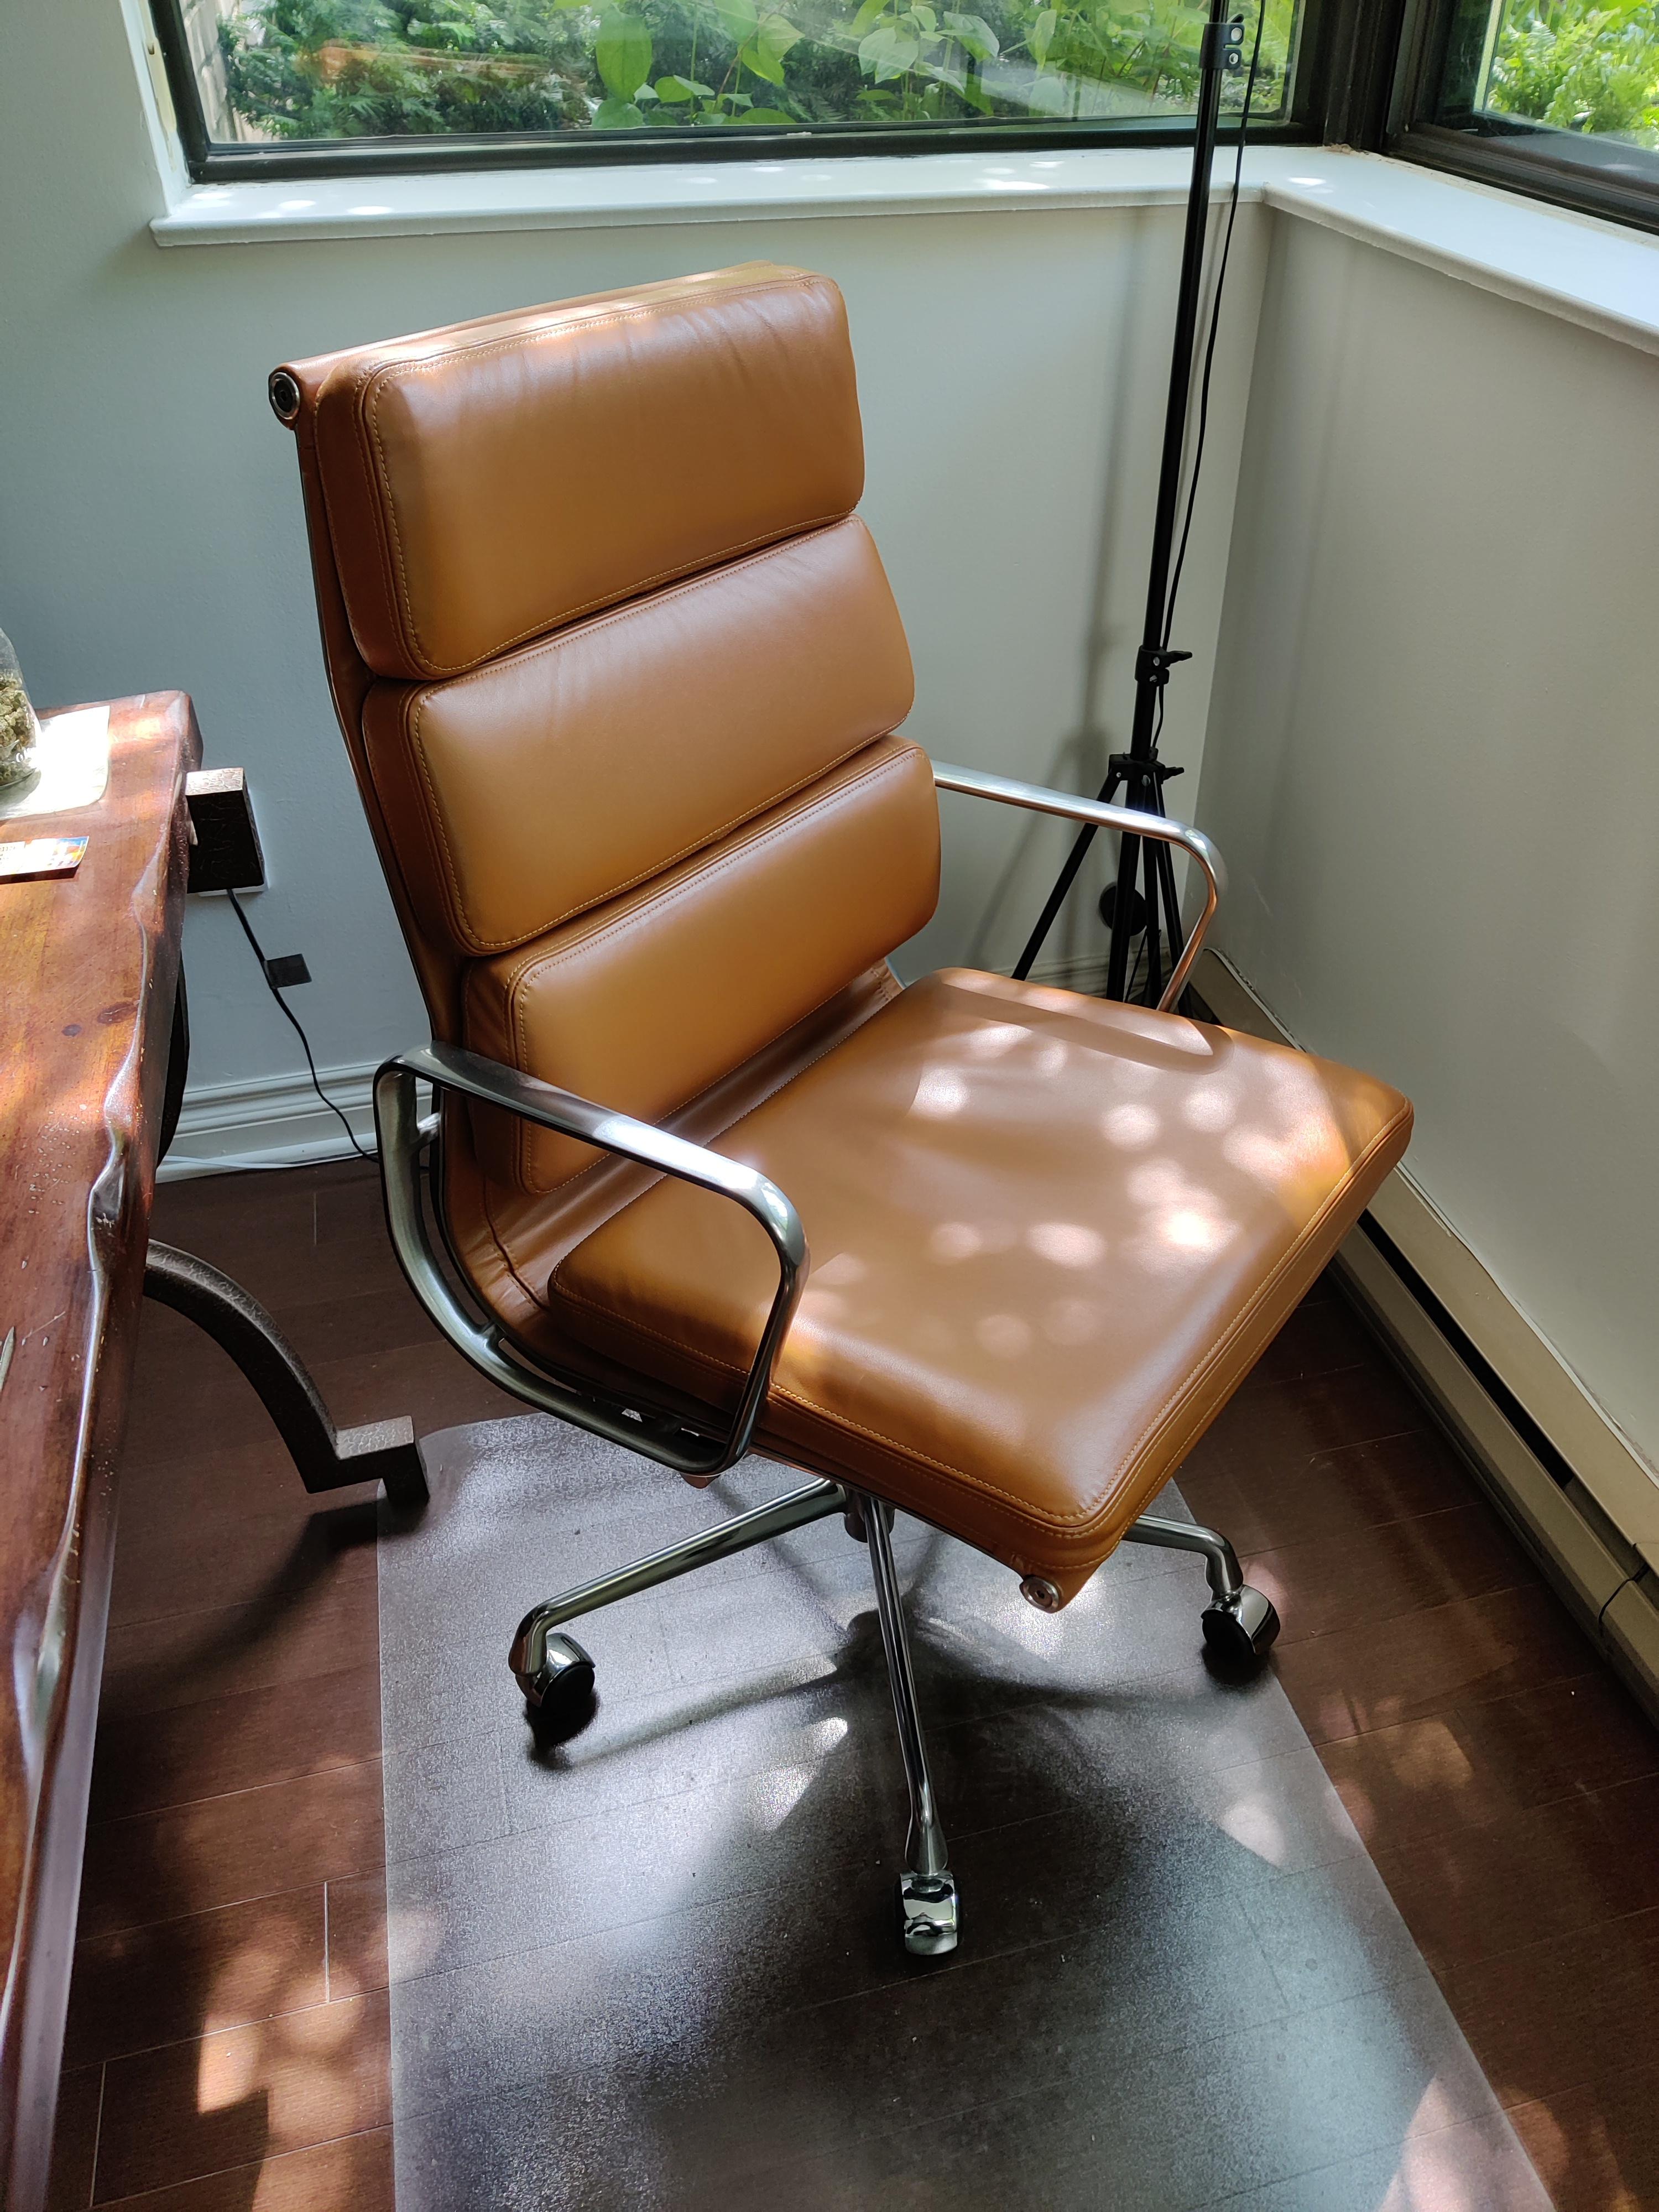 Pre-owned, nearly new, executive height Herman Miller soft pad Eames chair in tan leather. A seating solution that exudes both luxury and comfort. Designed by Charles and Ray Eames in 1969, this iconic chair is a true testament to the duo's